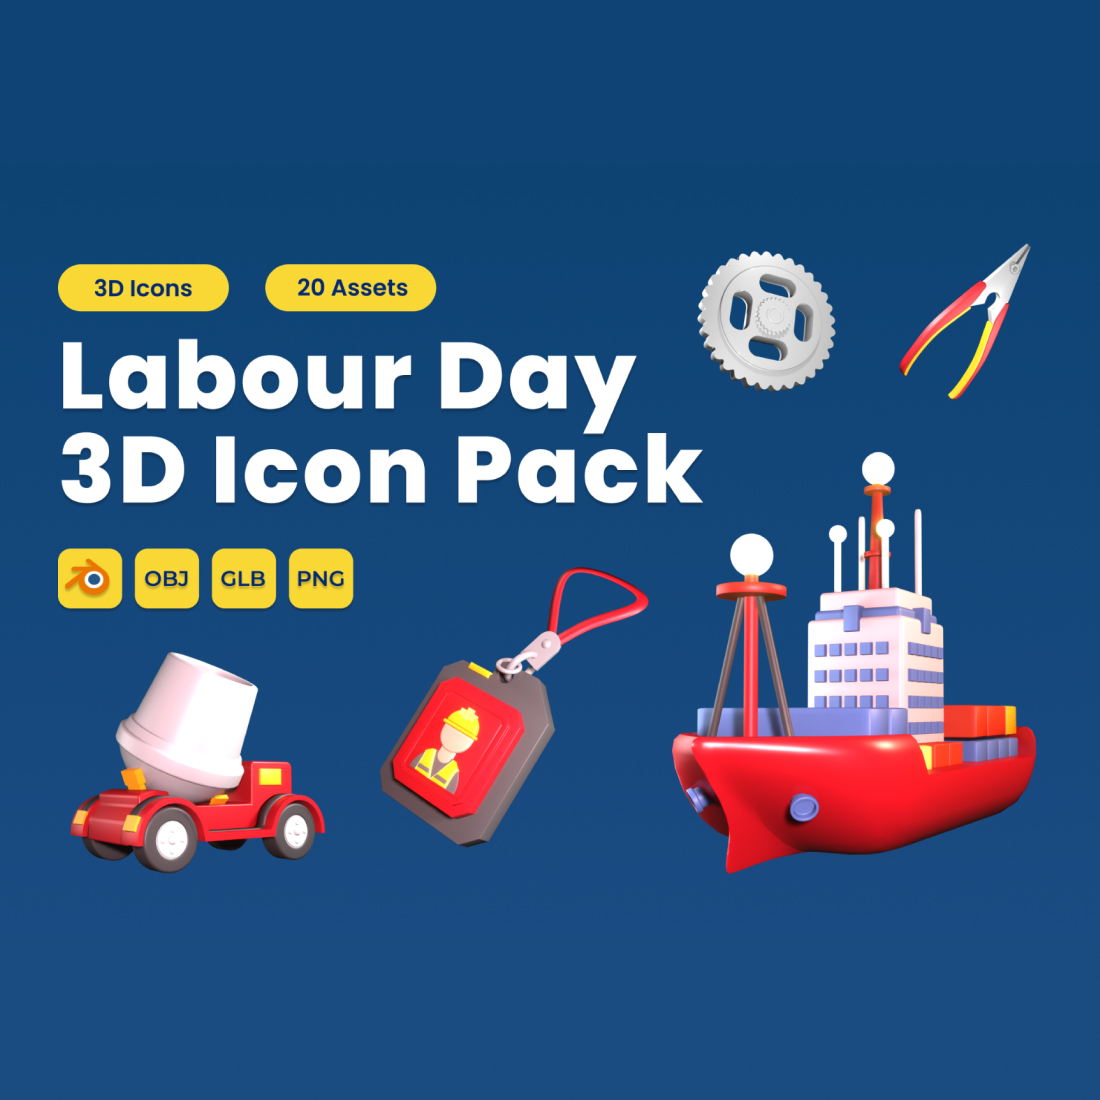 Labour Day 3D Icon Pack Vol 4 cover image.